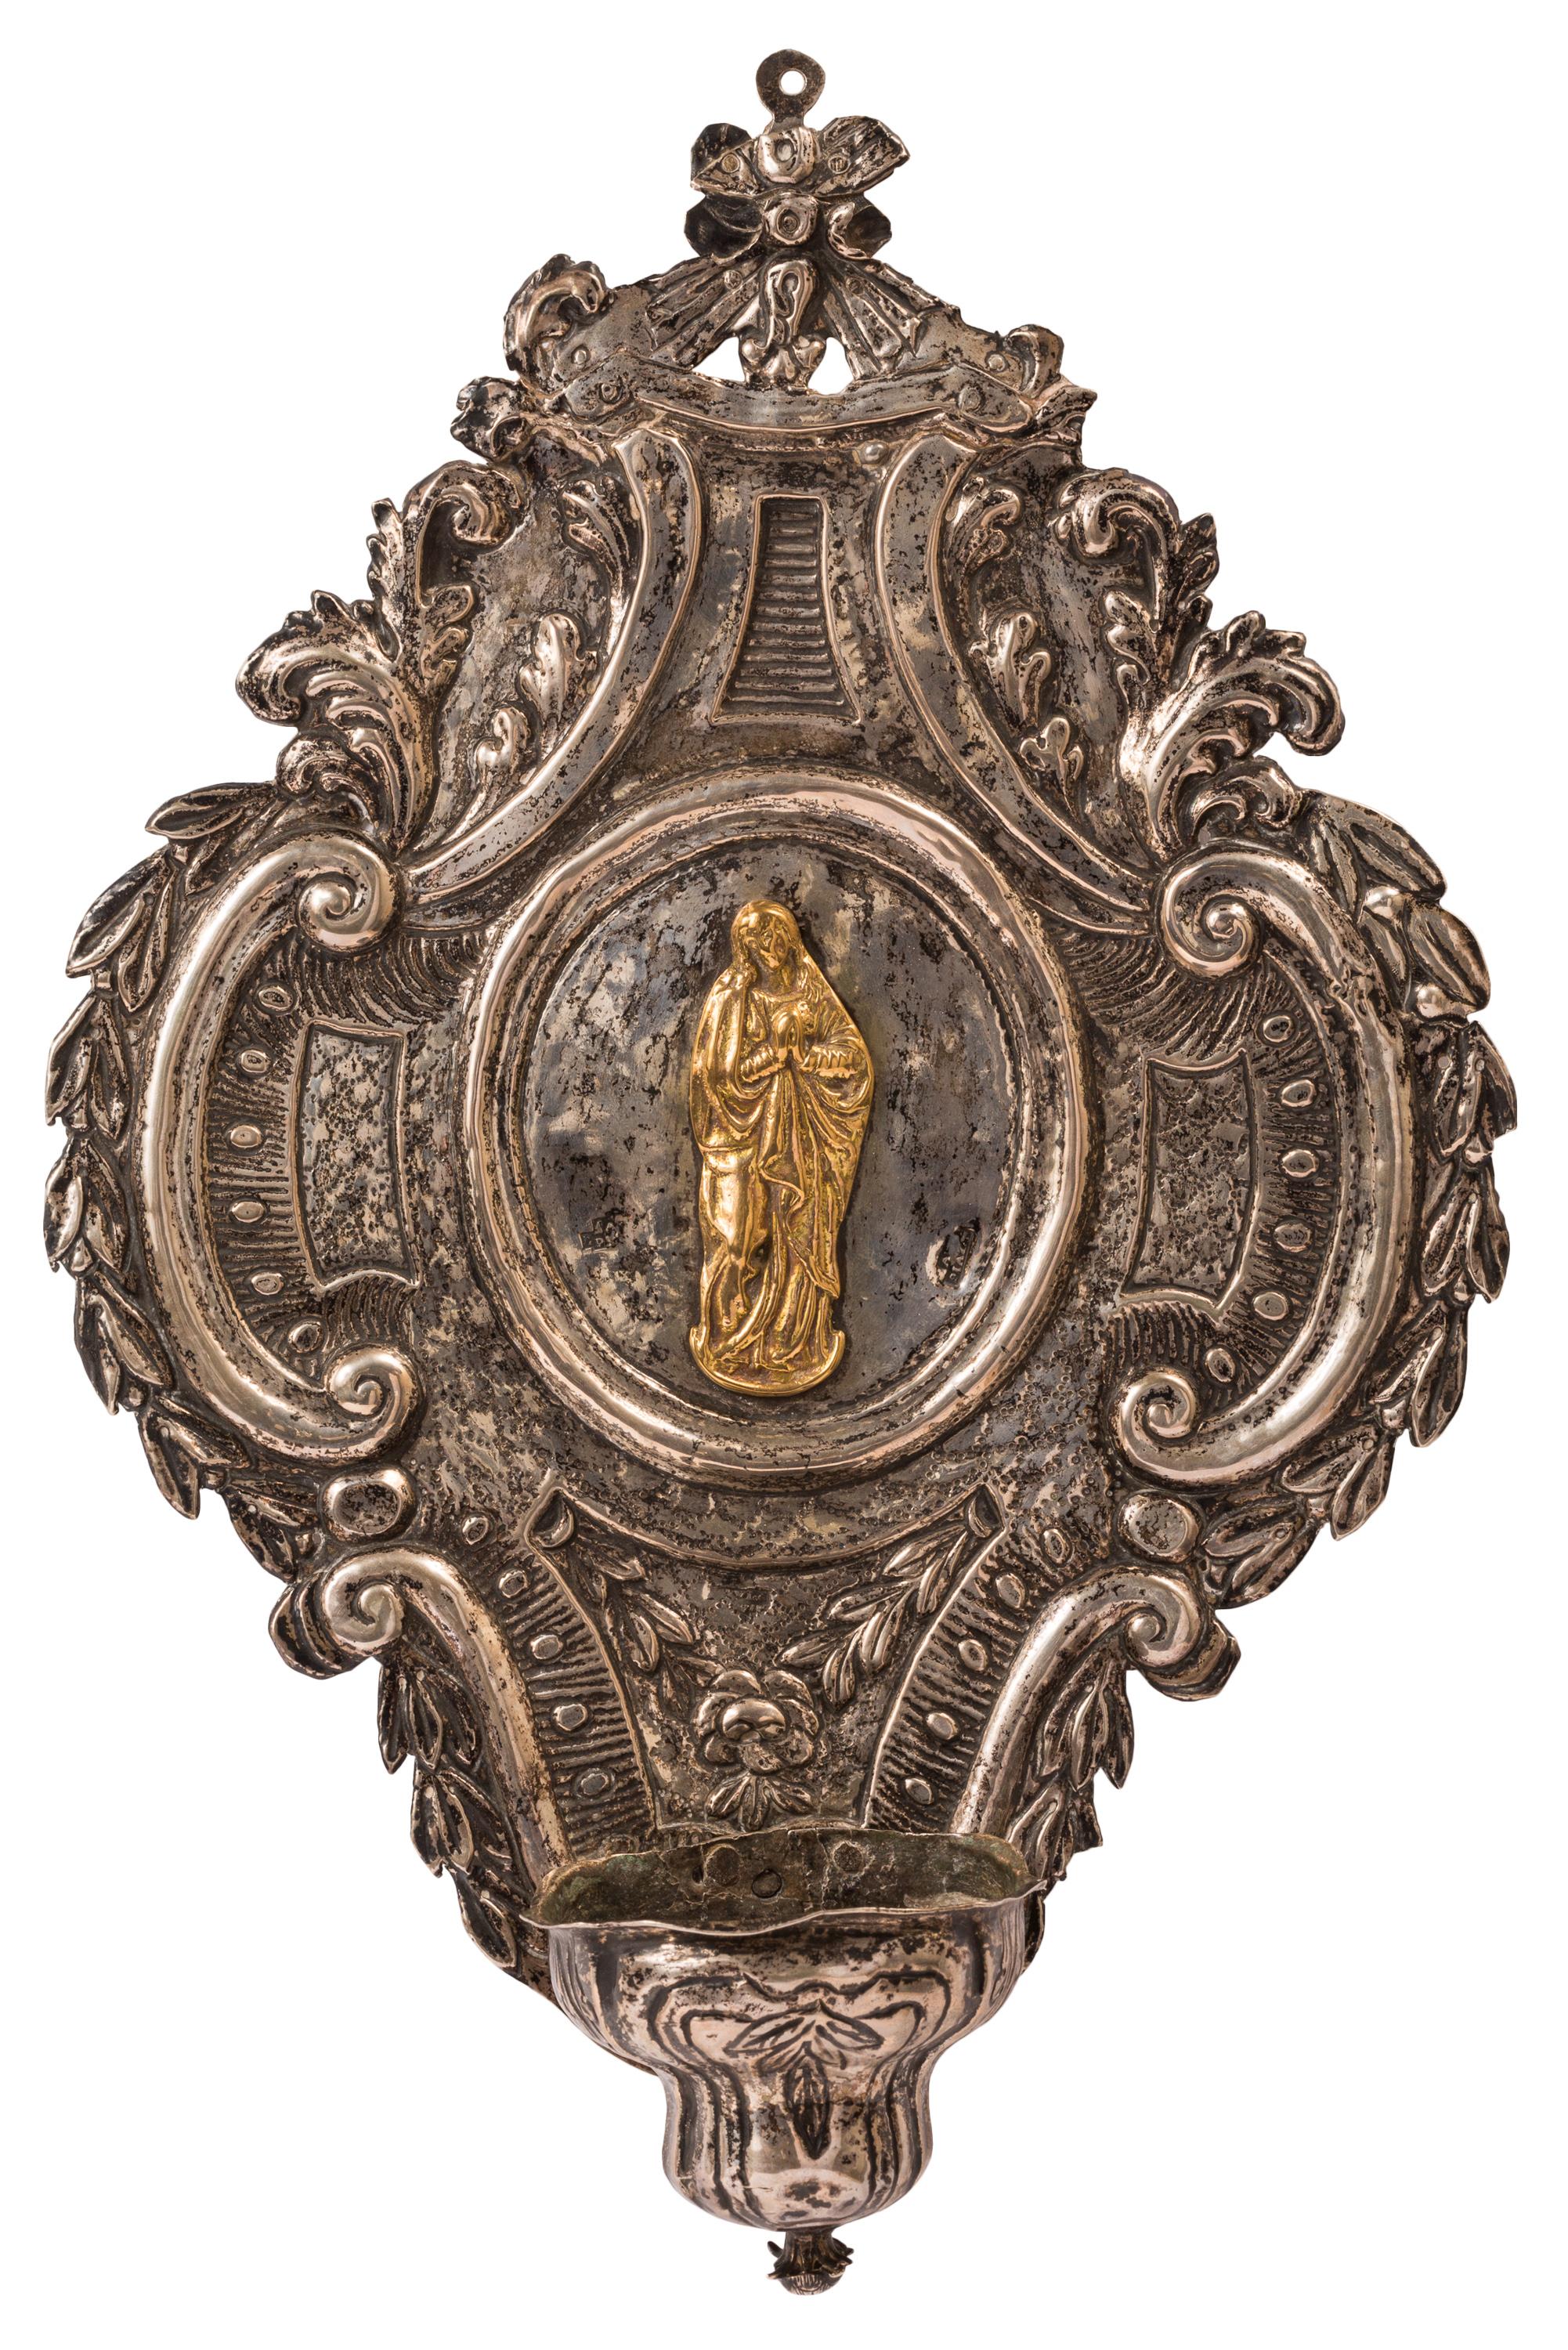 This highly decorative silver holy water font or stoup, is stamped with hallmarks placing its manufacture in Aspiazu, Bilbao, Spain during the late 18th century. The raised figure of the Virgin Mary at the center is silver gilt (or vermeil), in